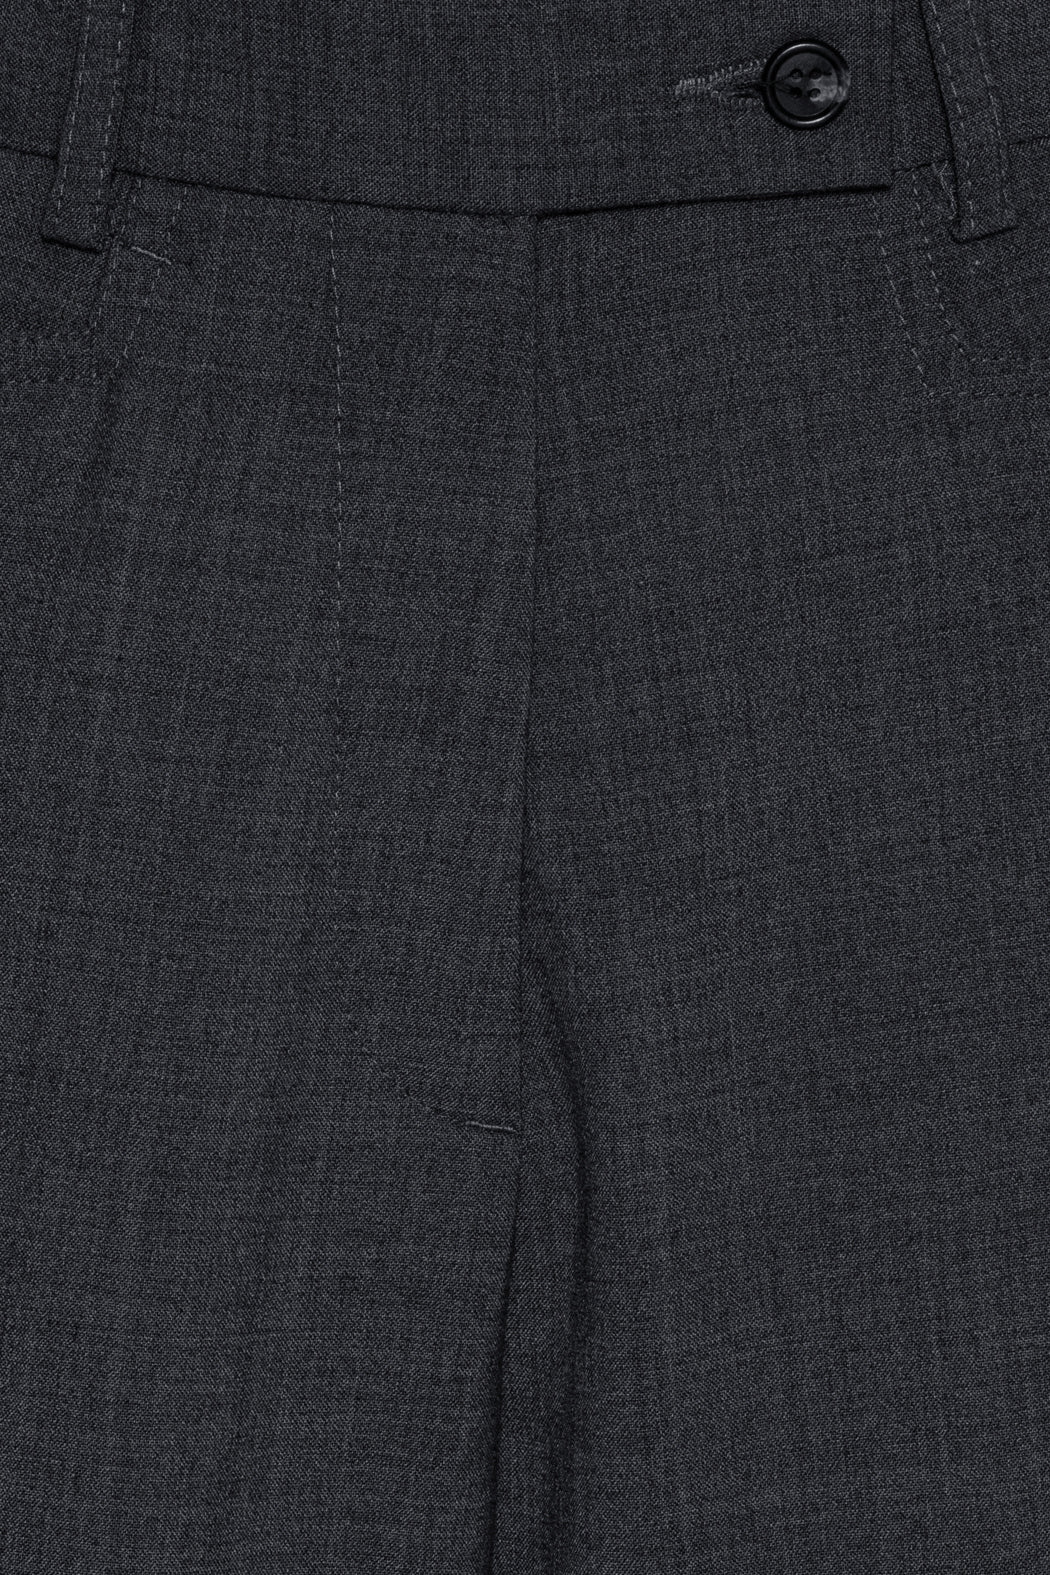 Bootcut suiting pant